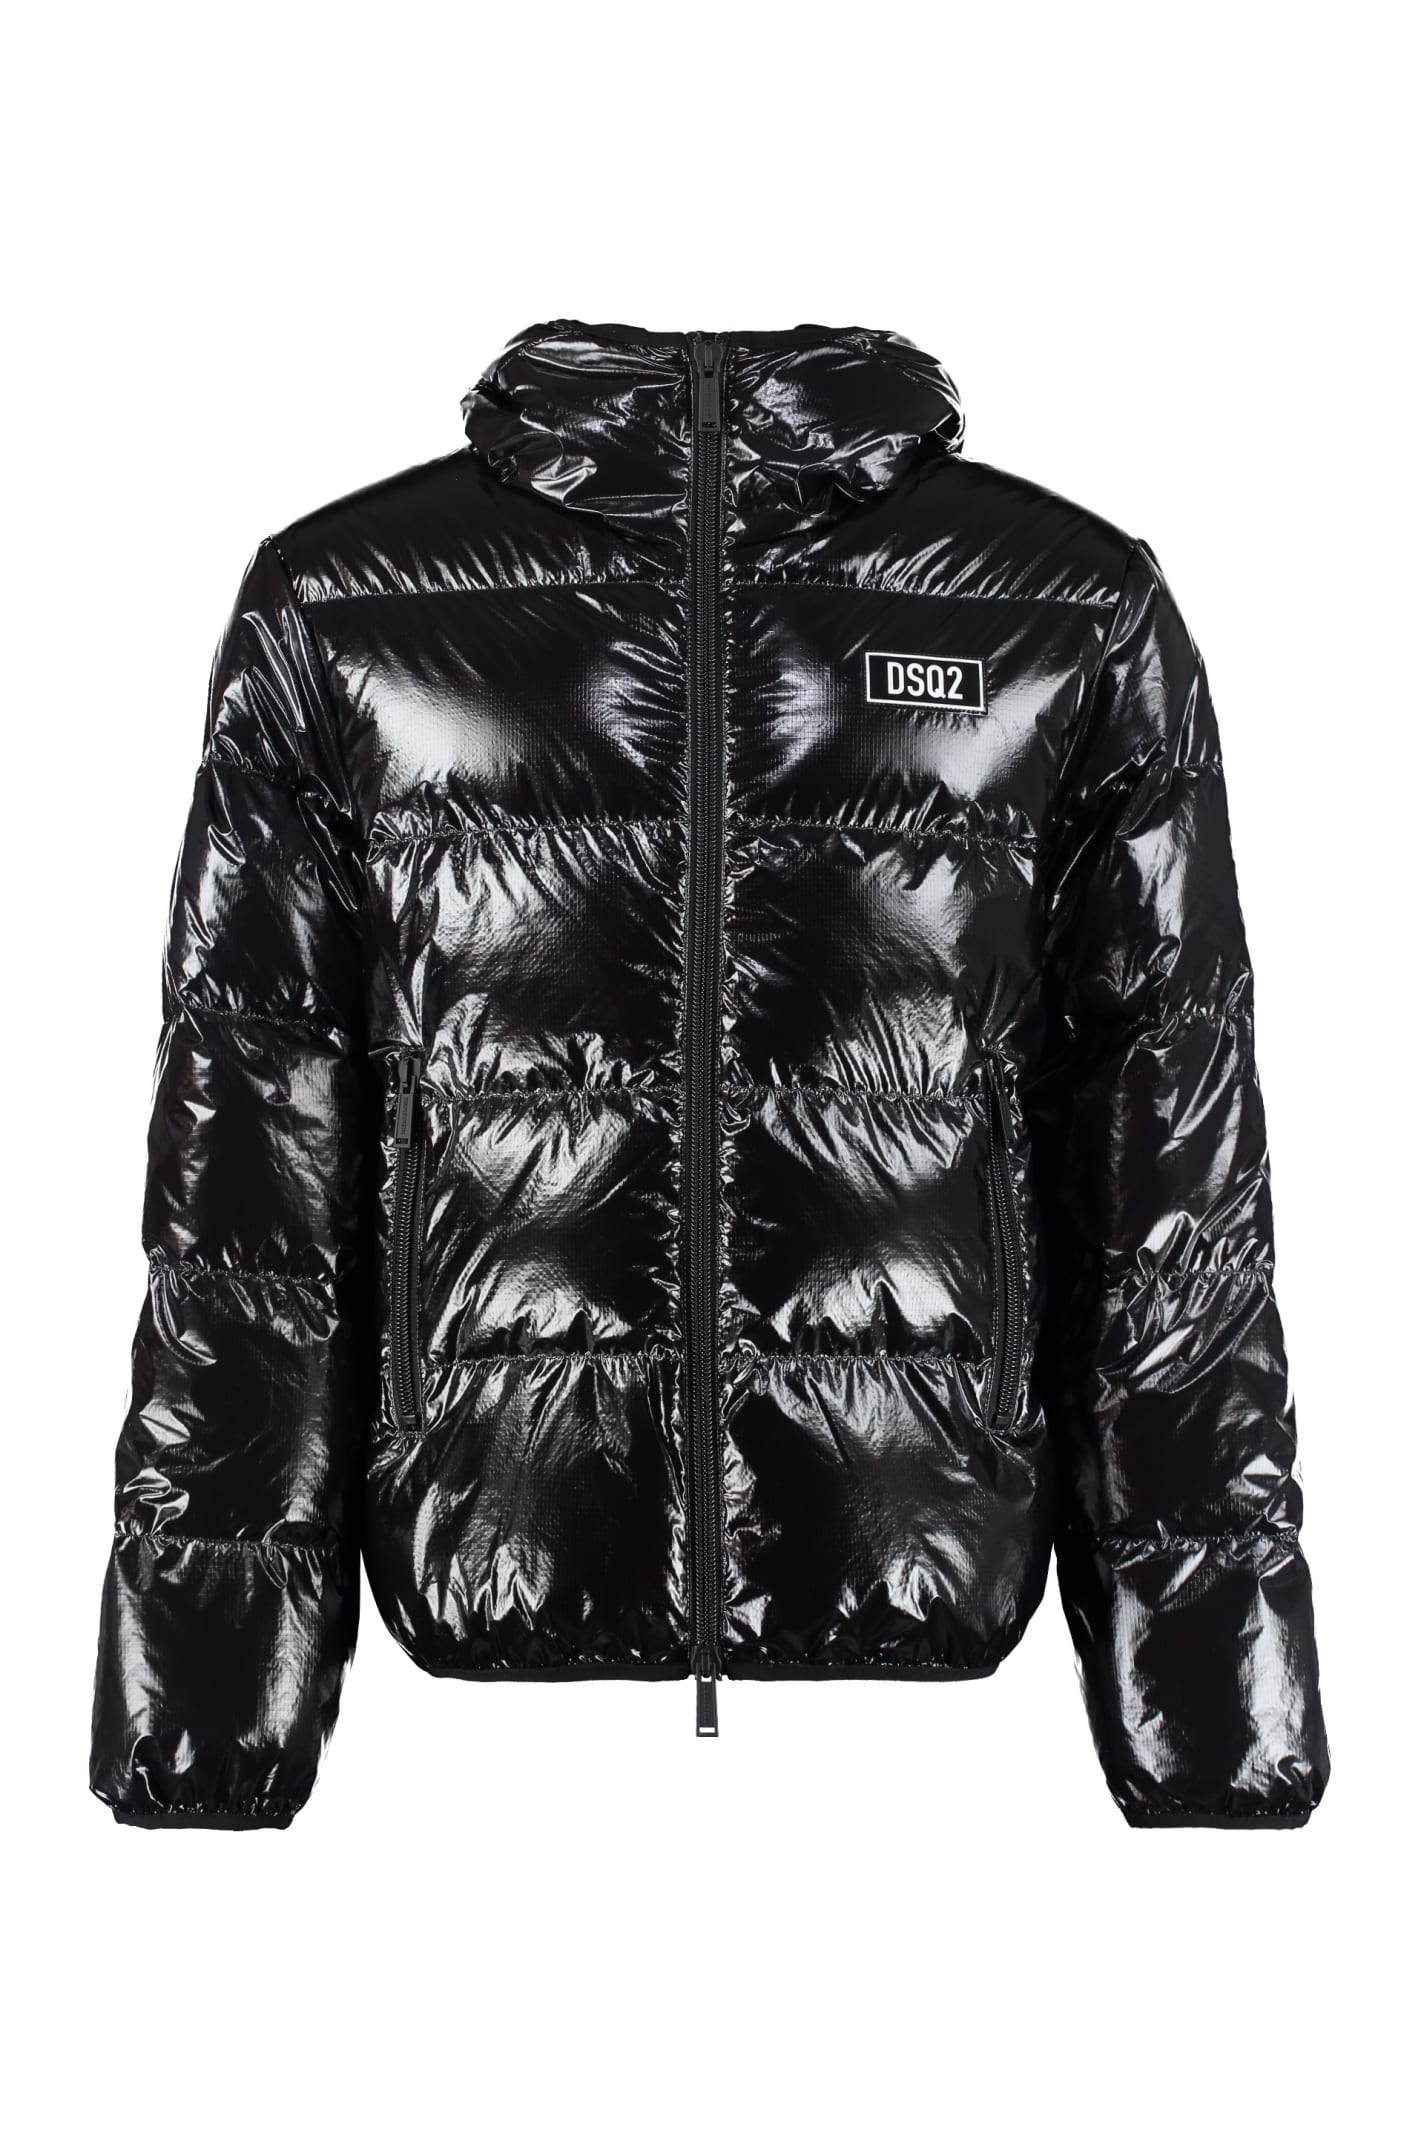 Dsquared2 Hooded Full-zip Down Jacket